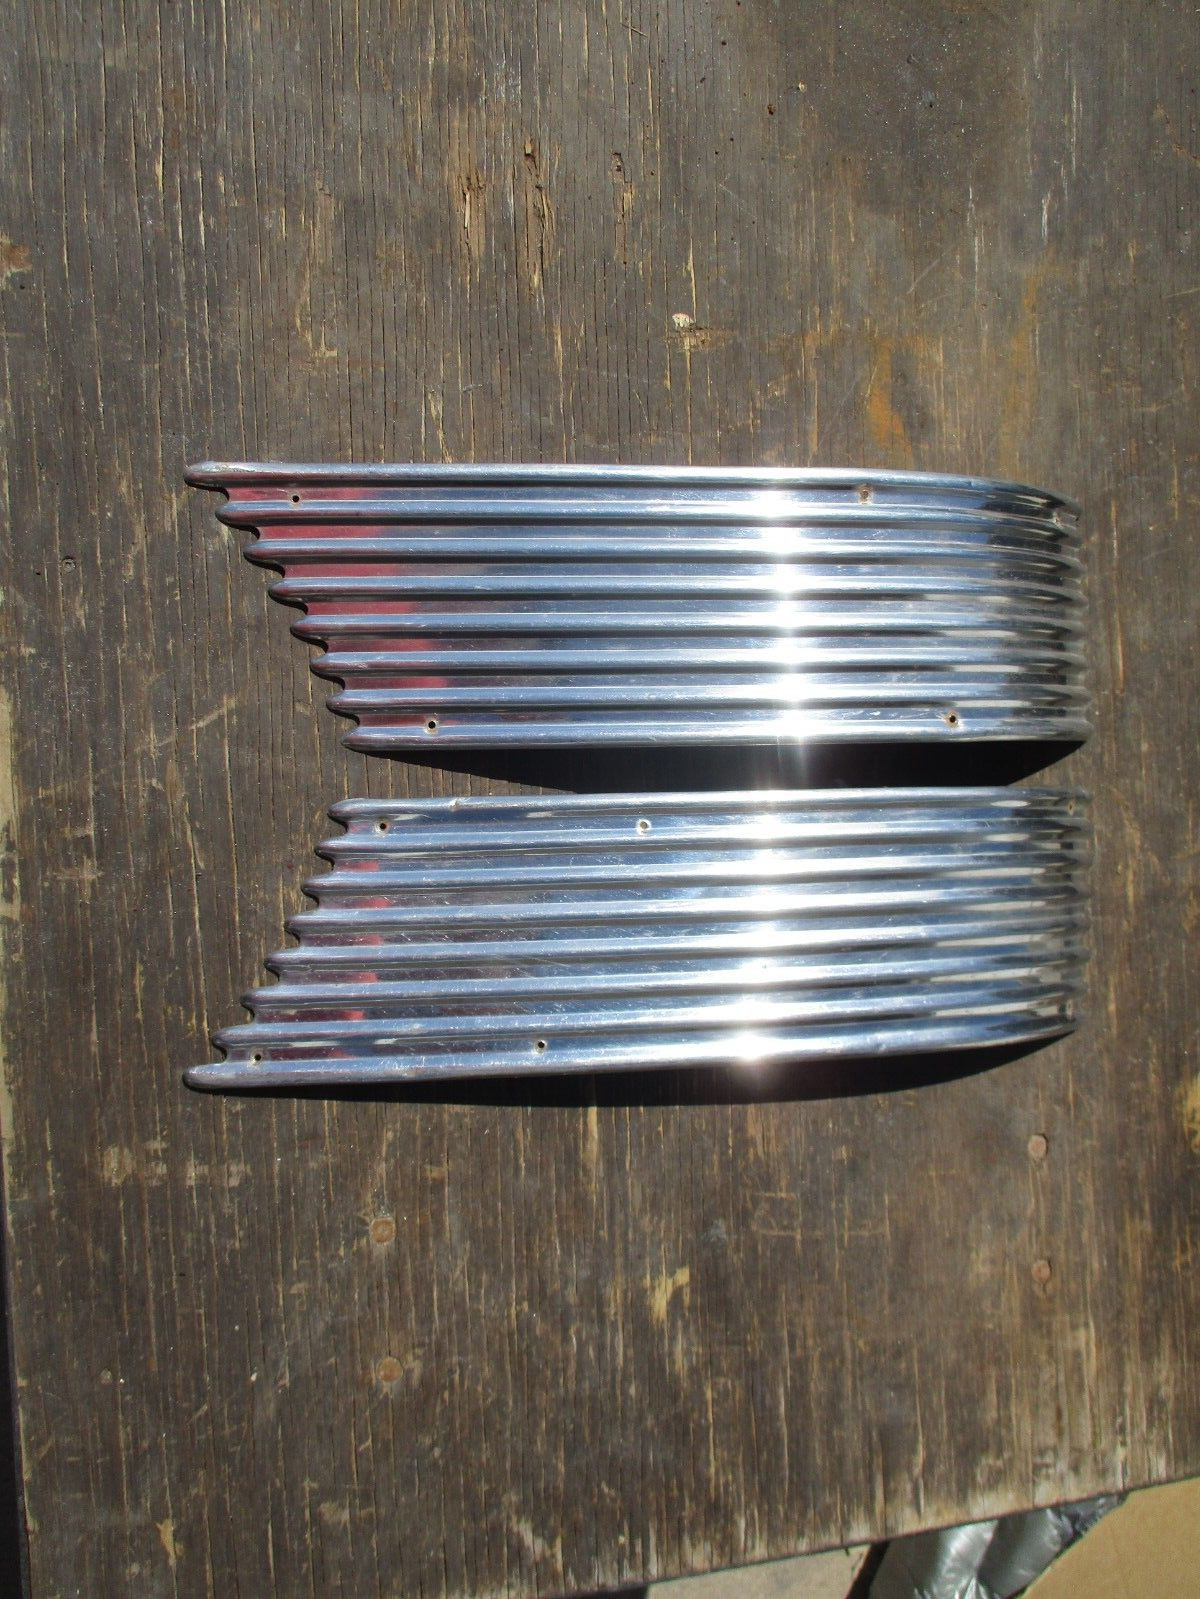 1941 CHEVY ACCESSORY FRONT FENDER SIDE TRIM MOLDINGS WASHBOARDS PAIR ORIGINAL 41